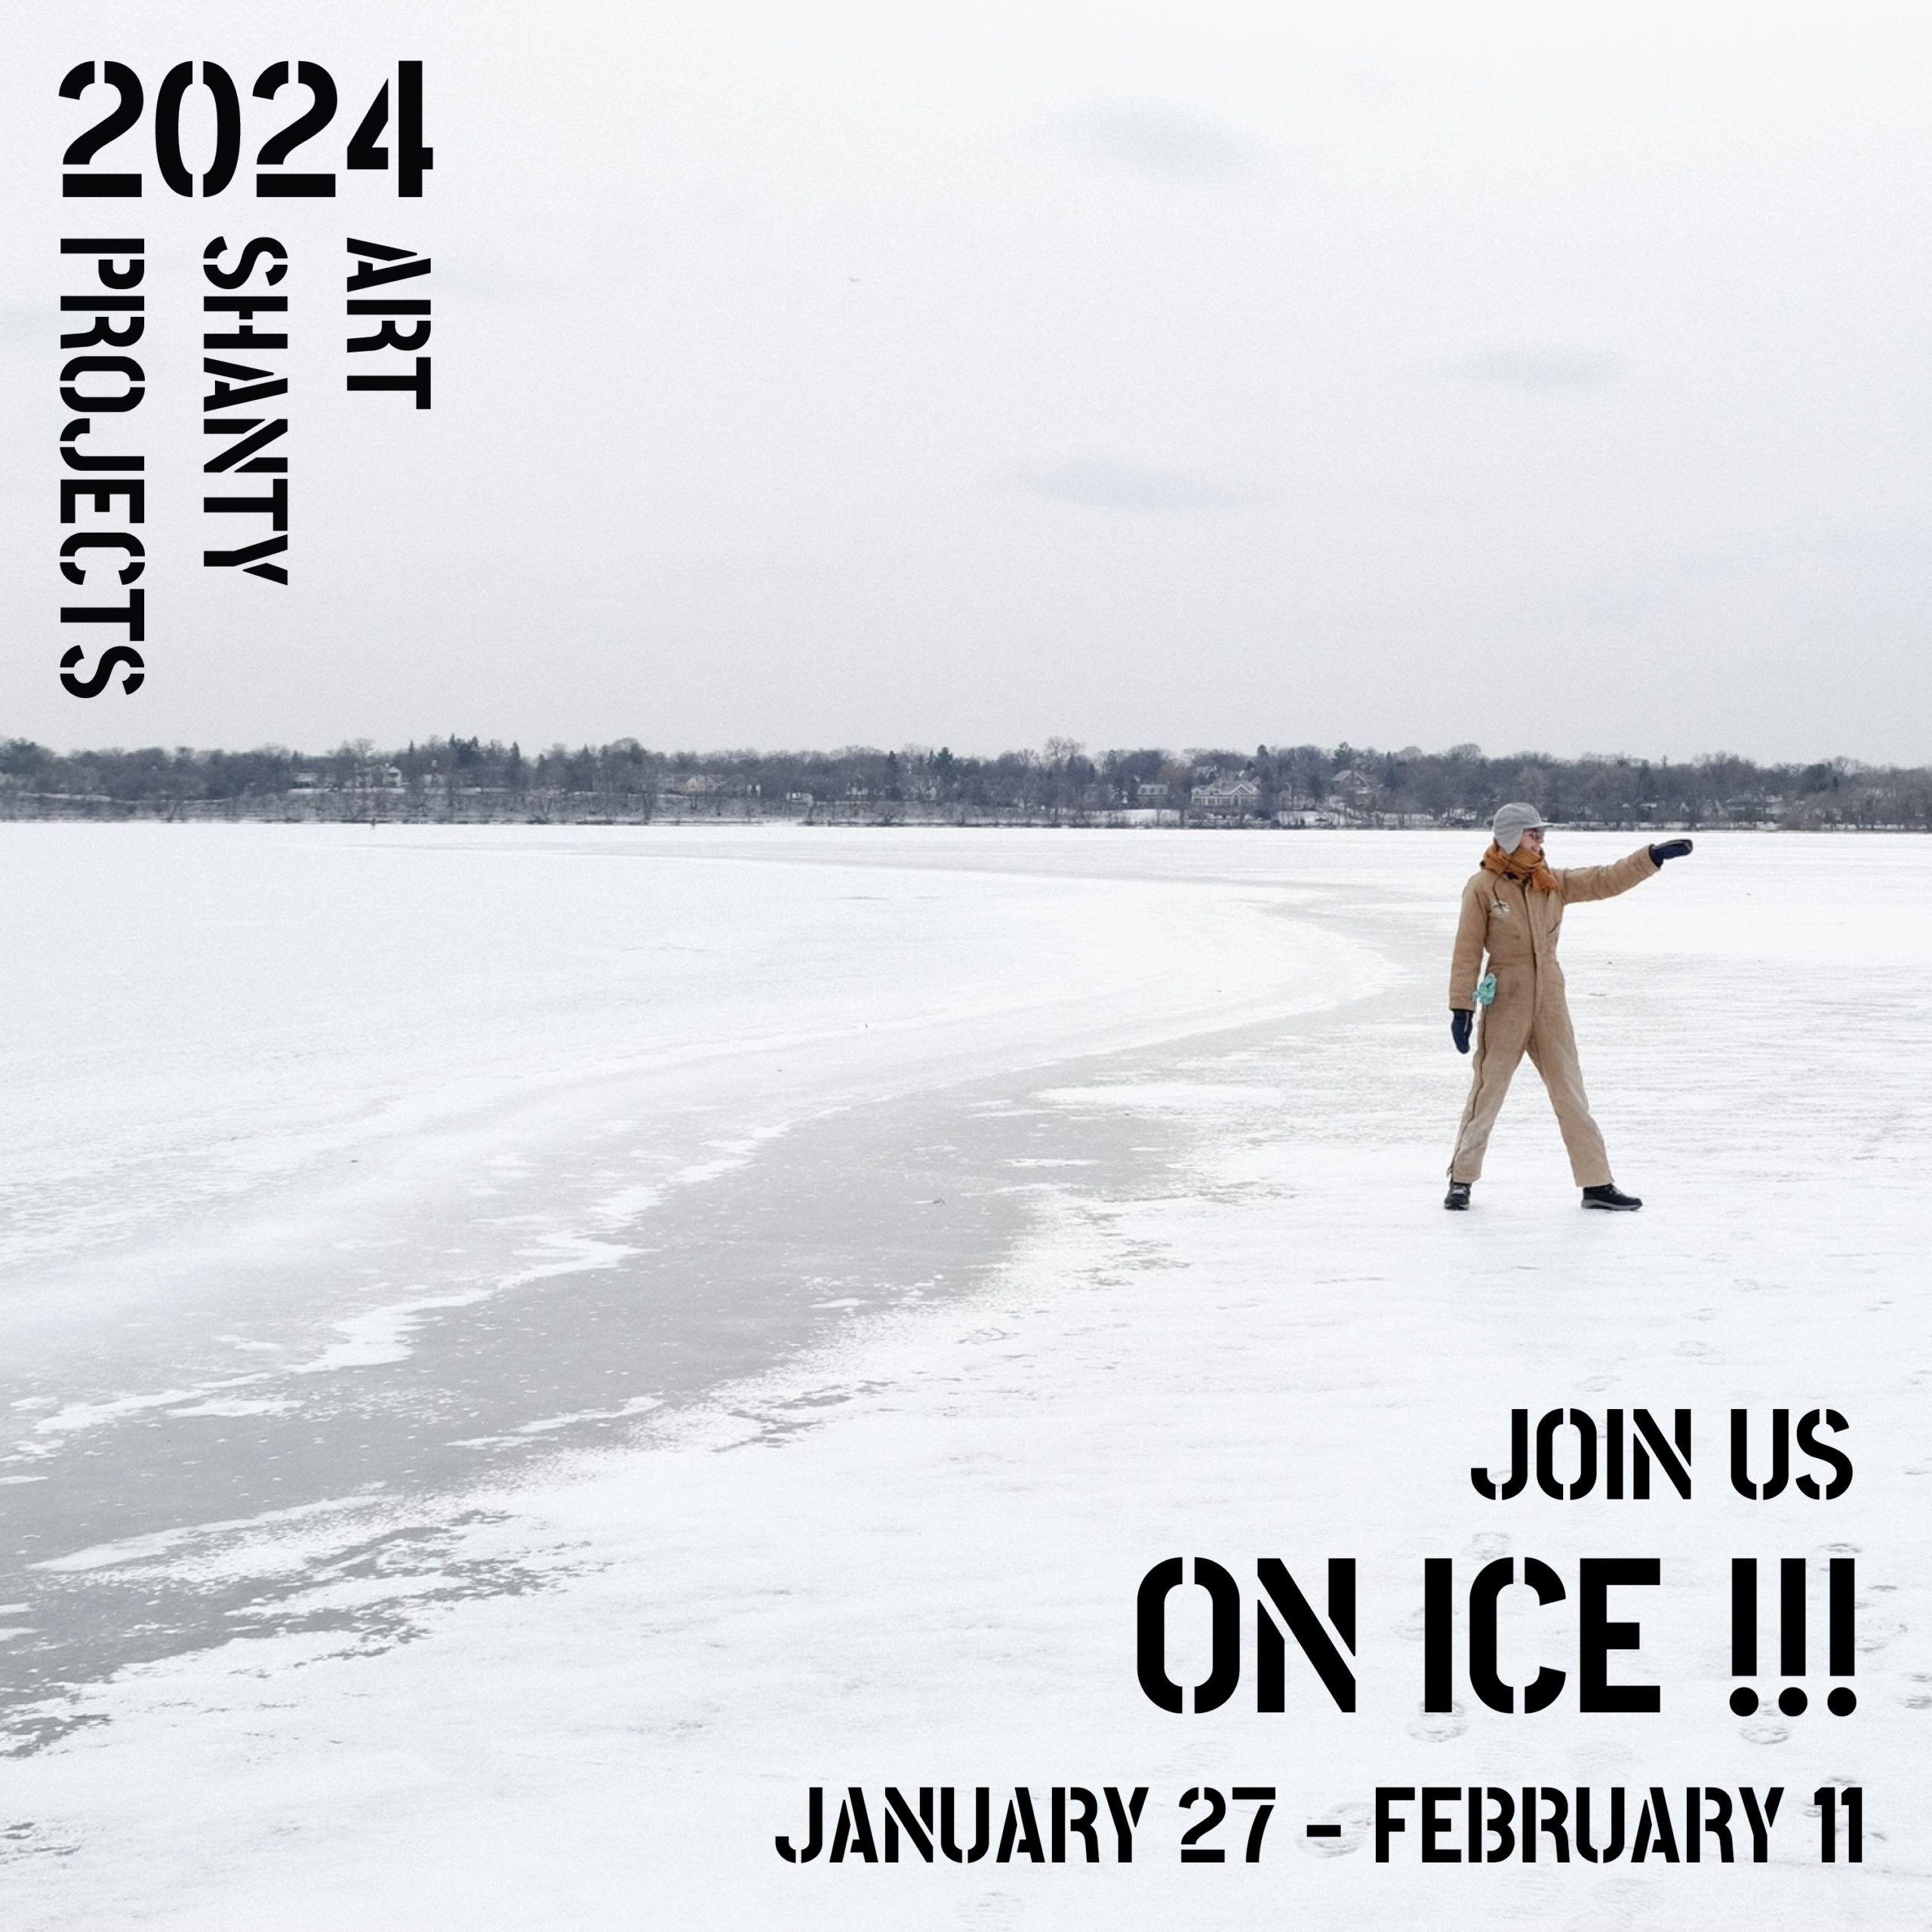 a person stands on a frozen lake, and words ready '2024 art shanty projects. join us ON ICE January 27 - February 11"